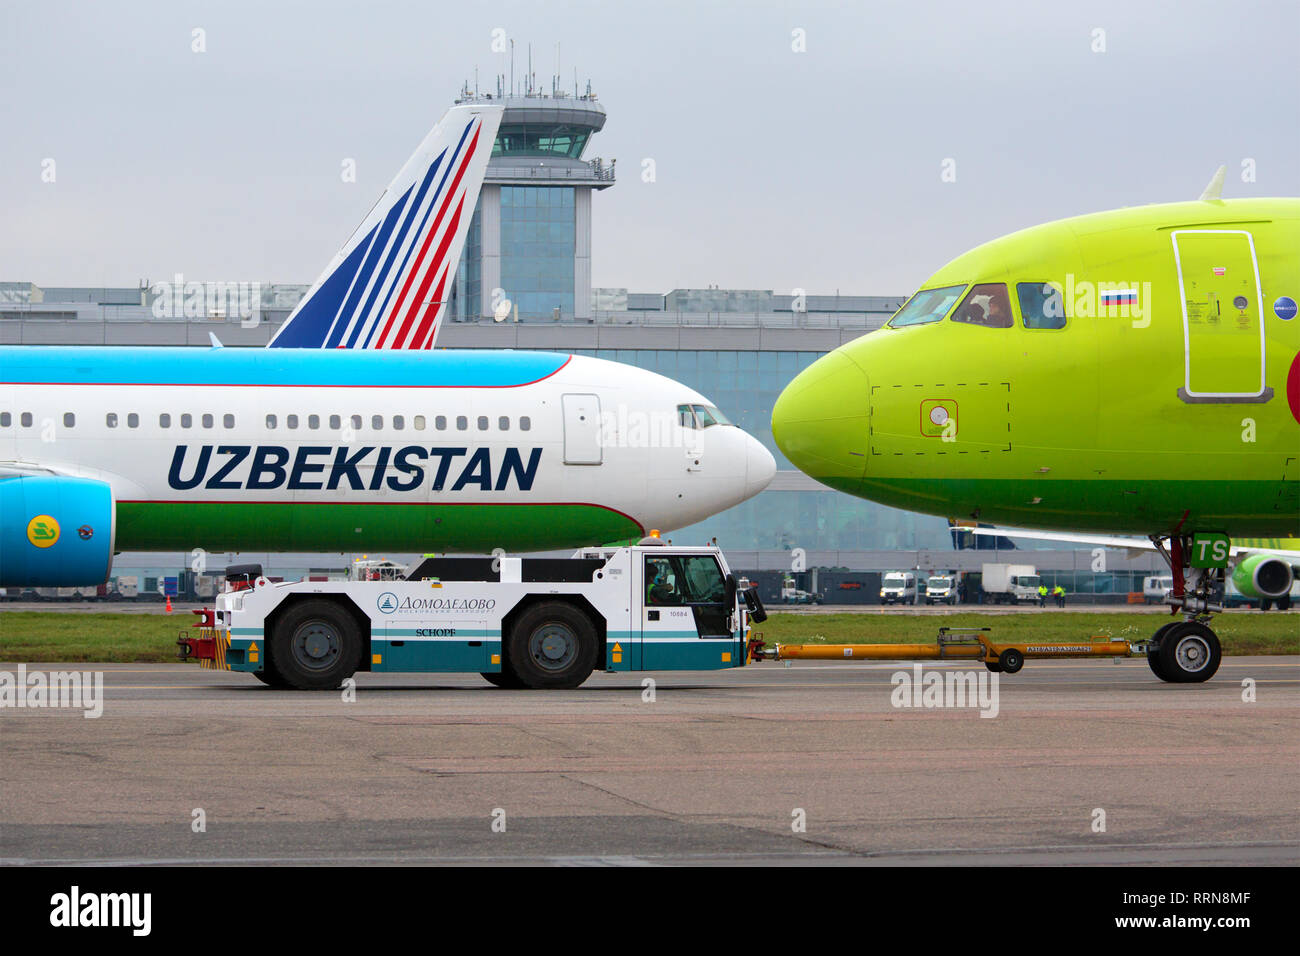 Uzbekistan Airways (Uzbek airlines) and Russian S7 Airlines airplanes on the background of the facade of Moscow Domodedovo airport, Russia Stock Photo